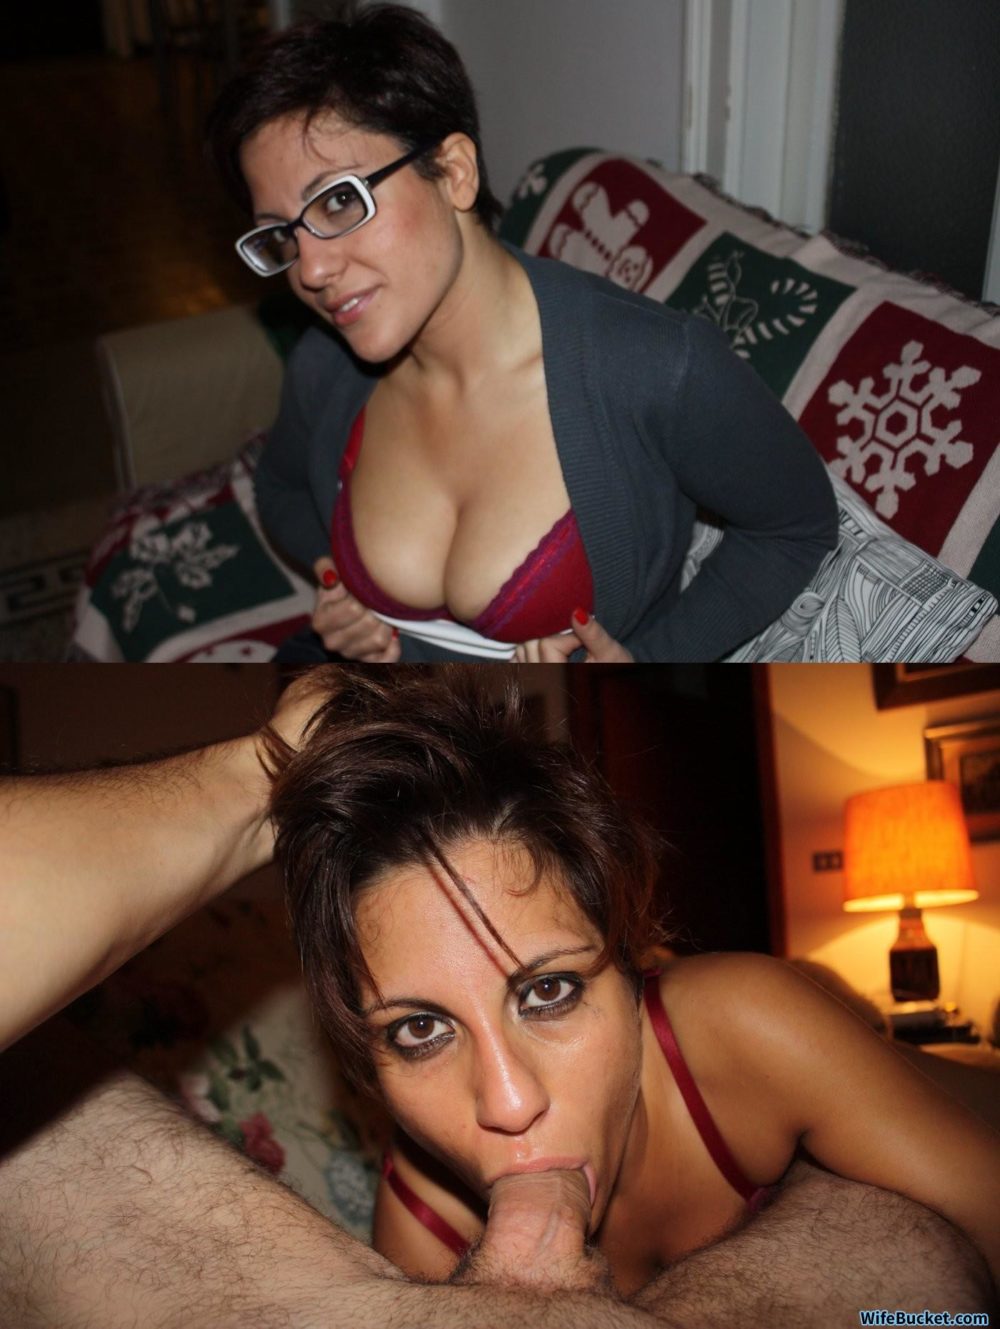 before-after pics – Page 5 Sex Pic Hd